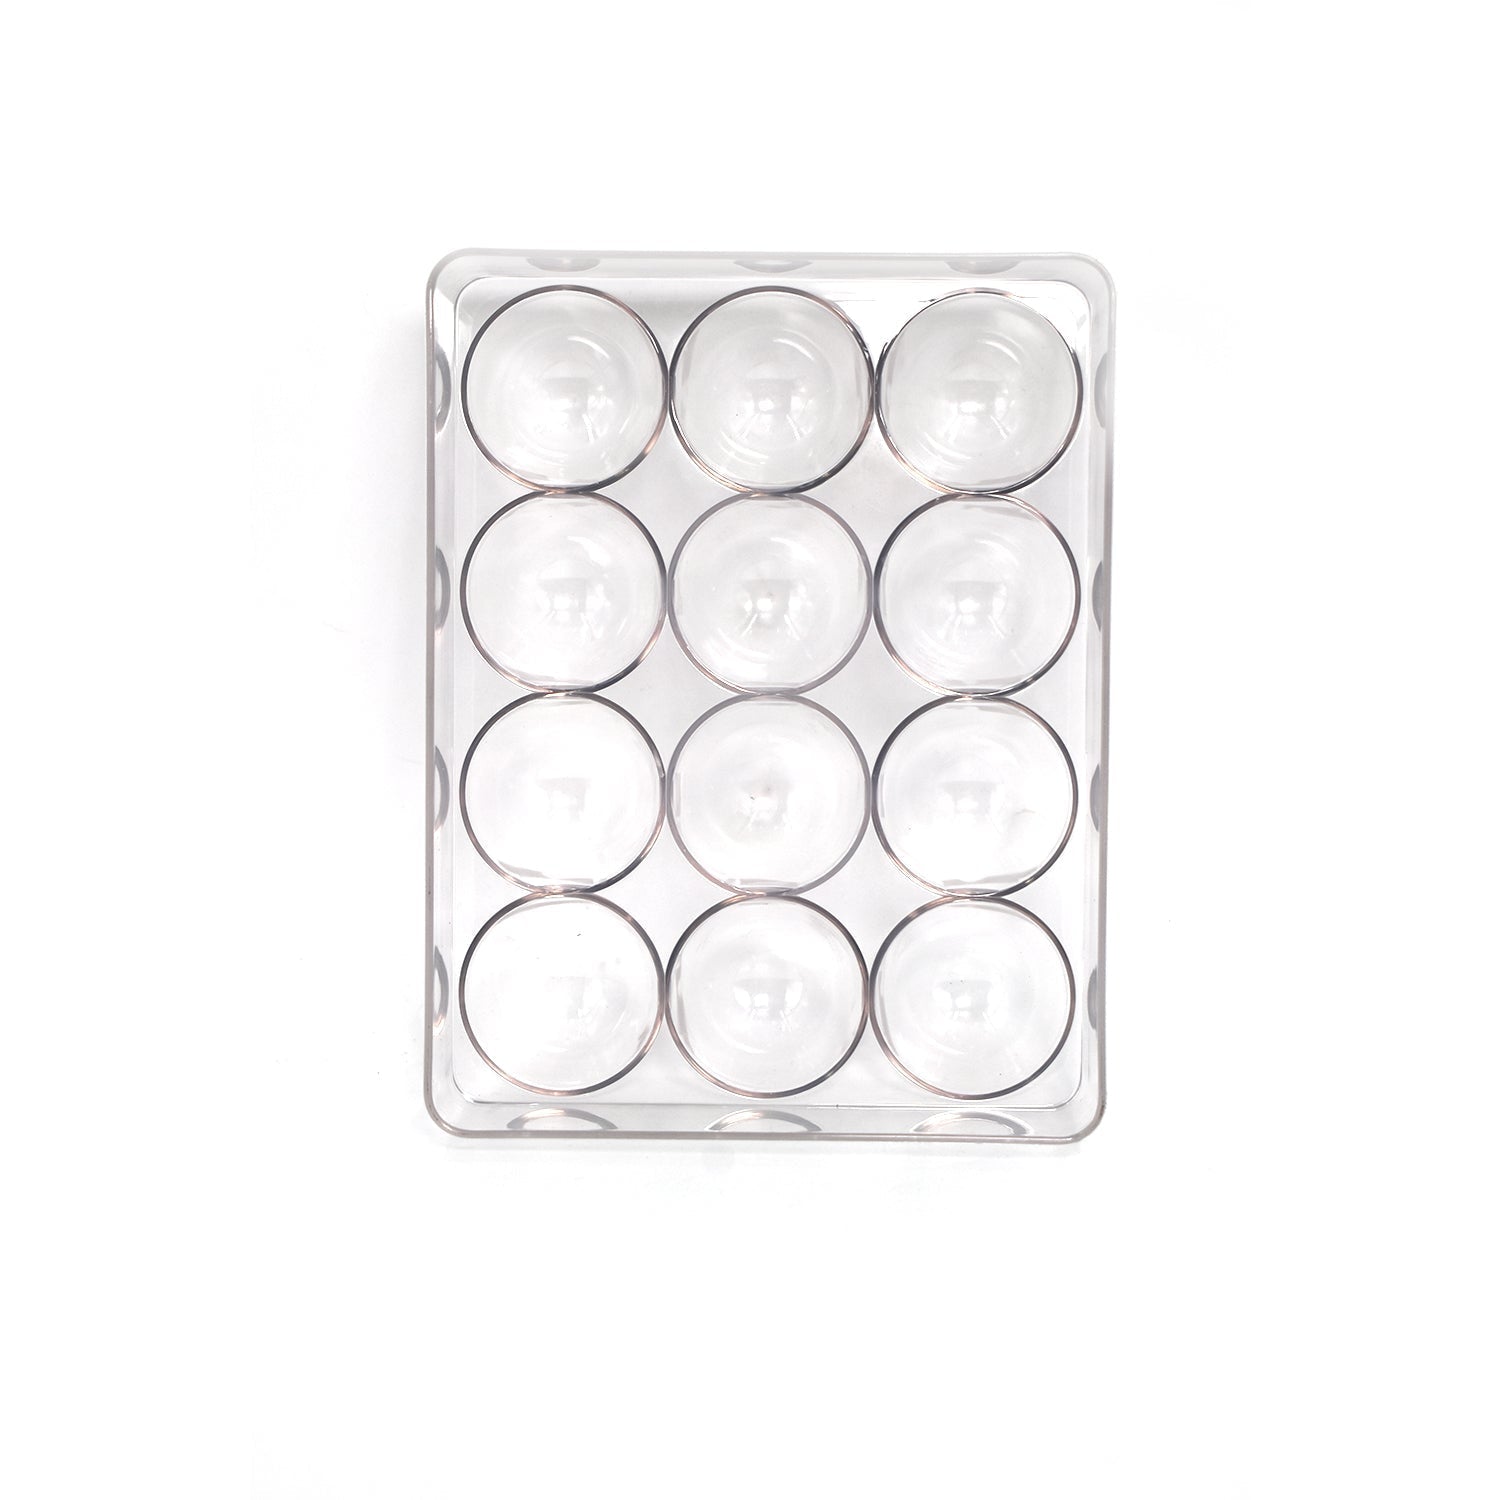 2794B 12 Cavity Egg Storage Box For Holding And Placing Eggs Easily And Firmly. DeoDap